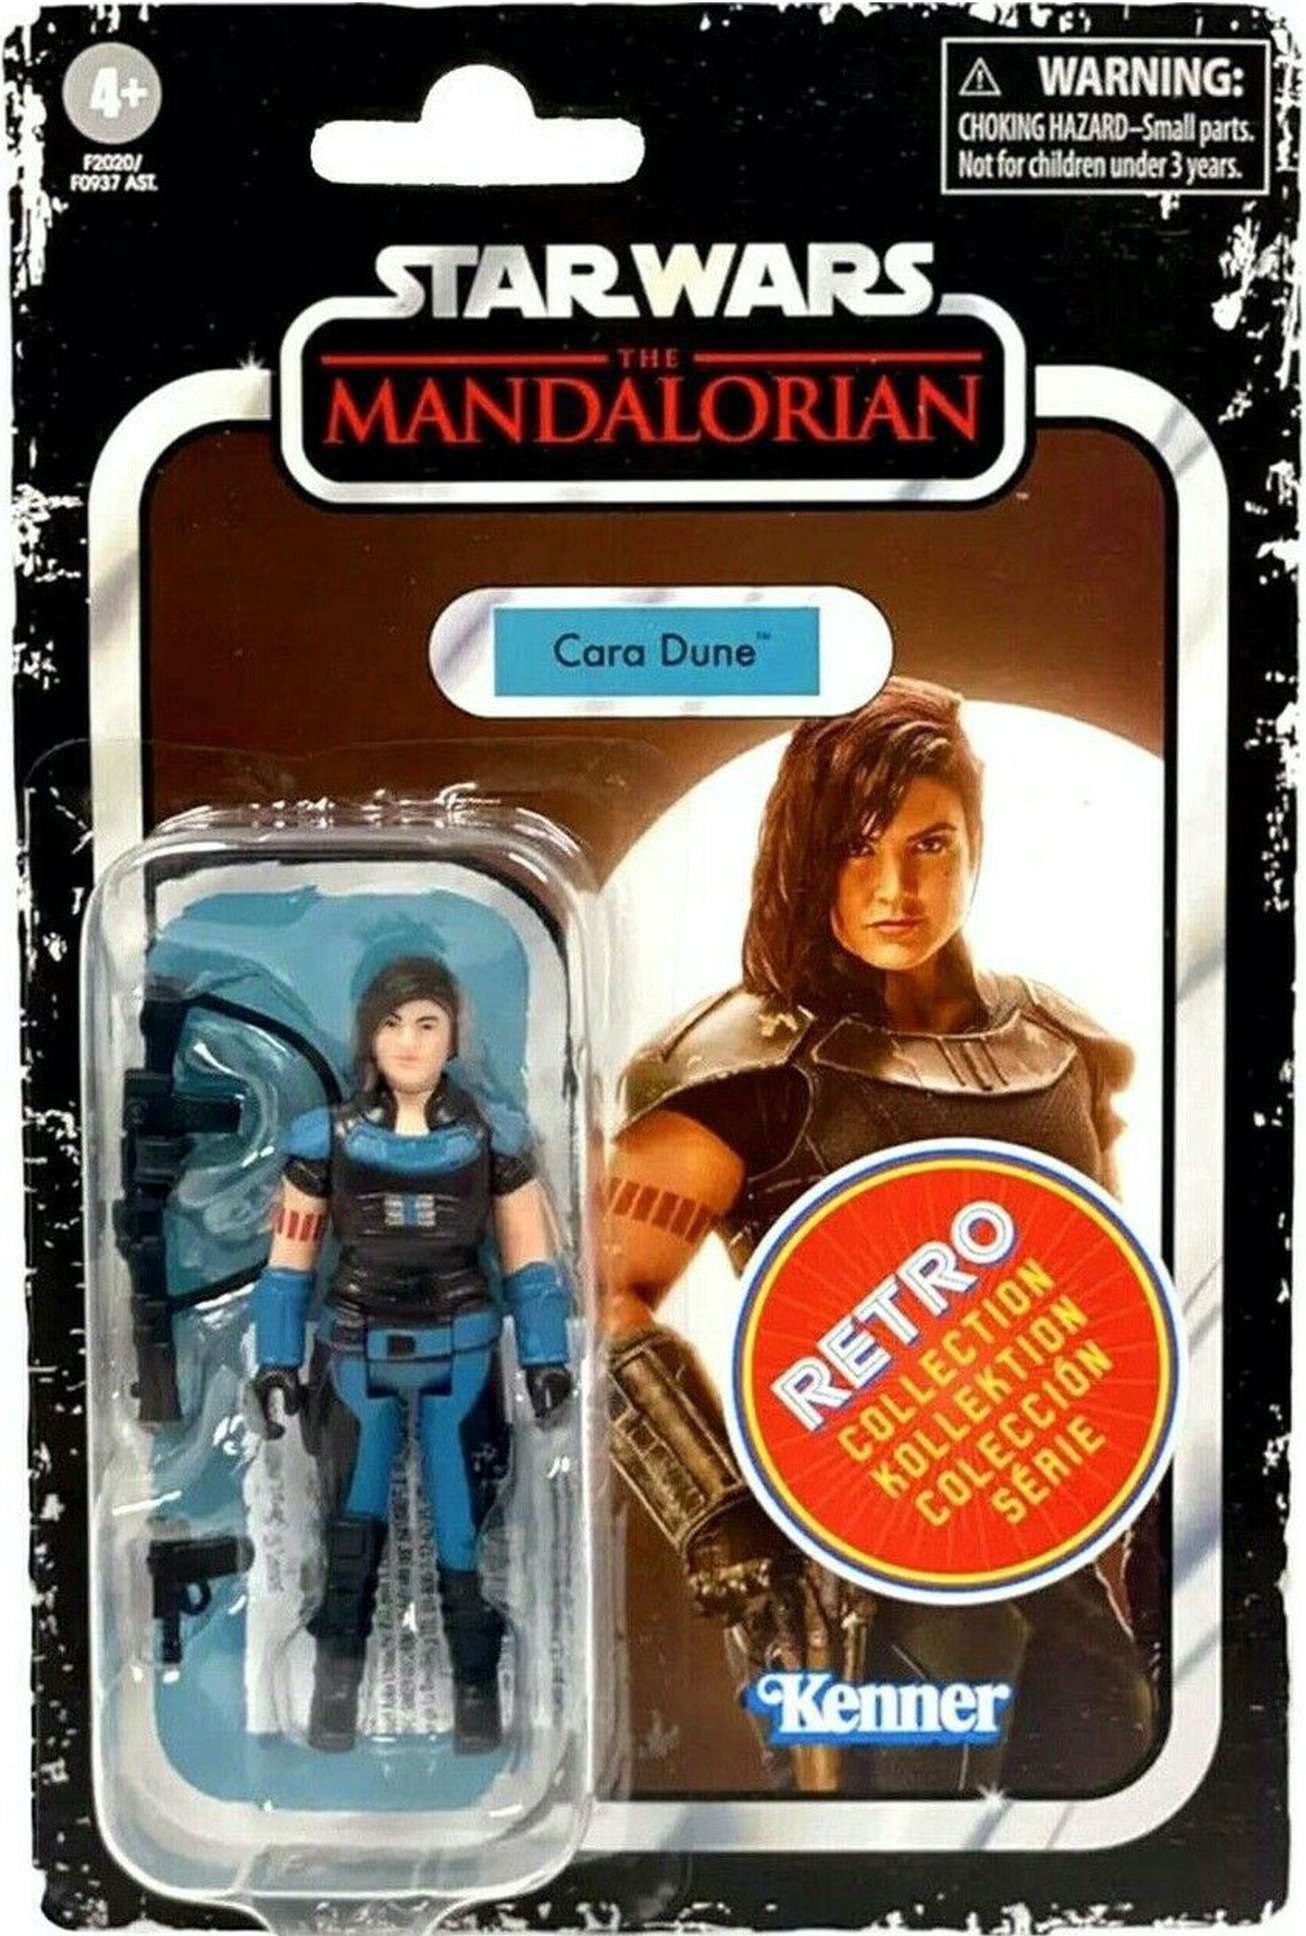 The Mandalorian Cara Dune The Vintage Collection Action Figure 3.75" Star Wars 